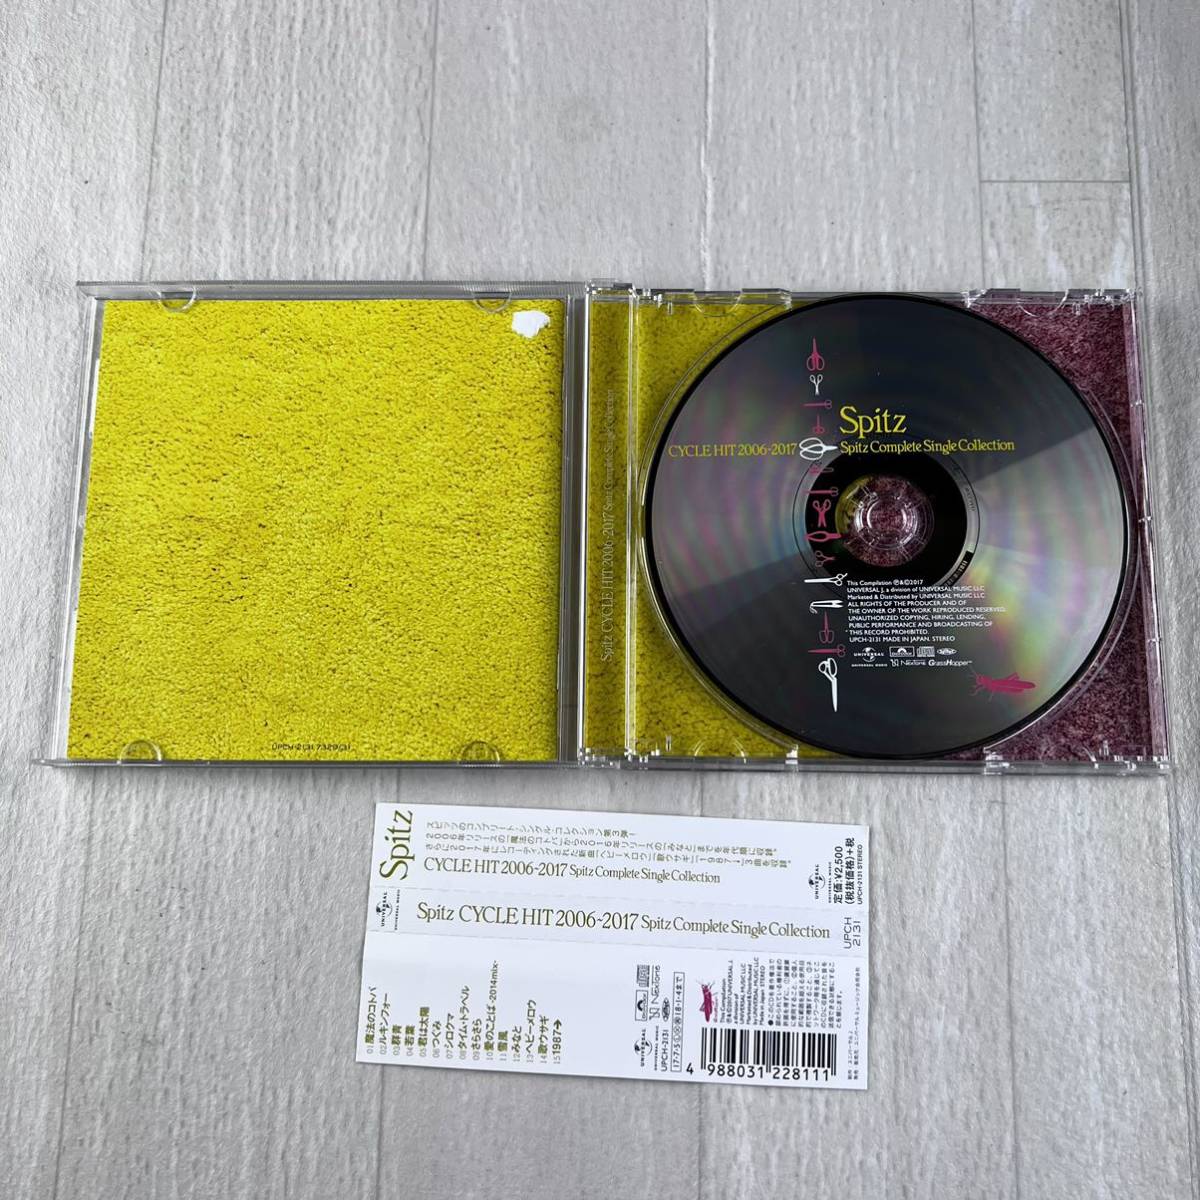 Spitz CYCLE HIT 2006-2007 Spitz Complete Single Collection CD スピッツ_画像2